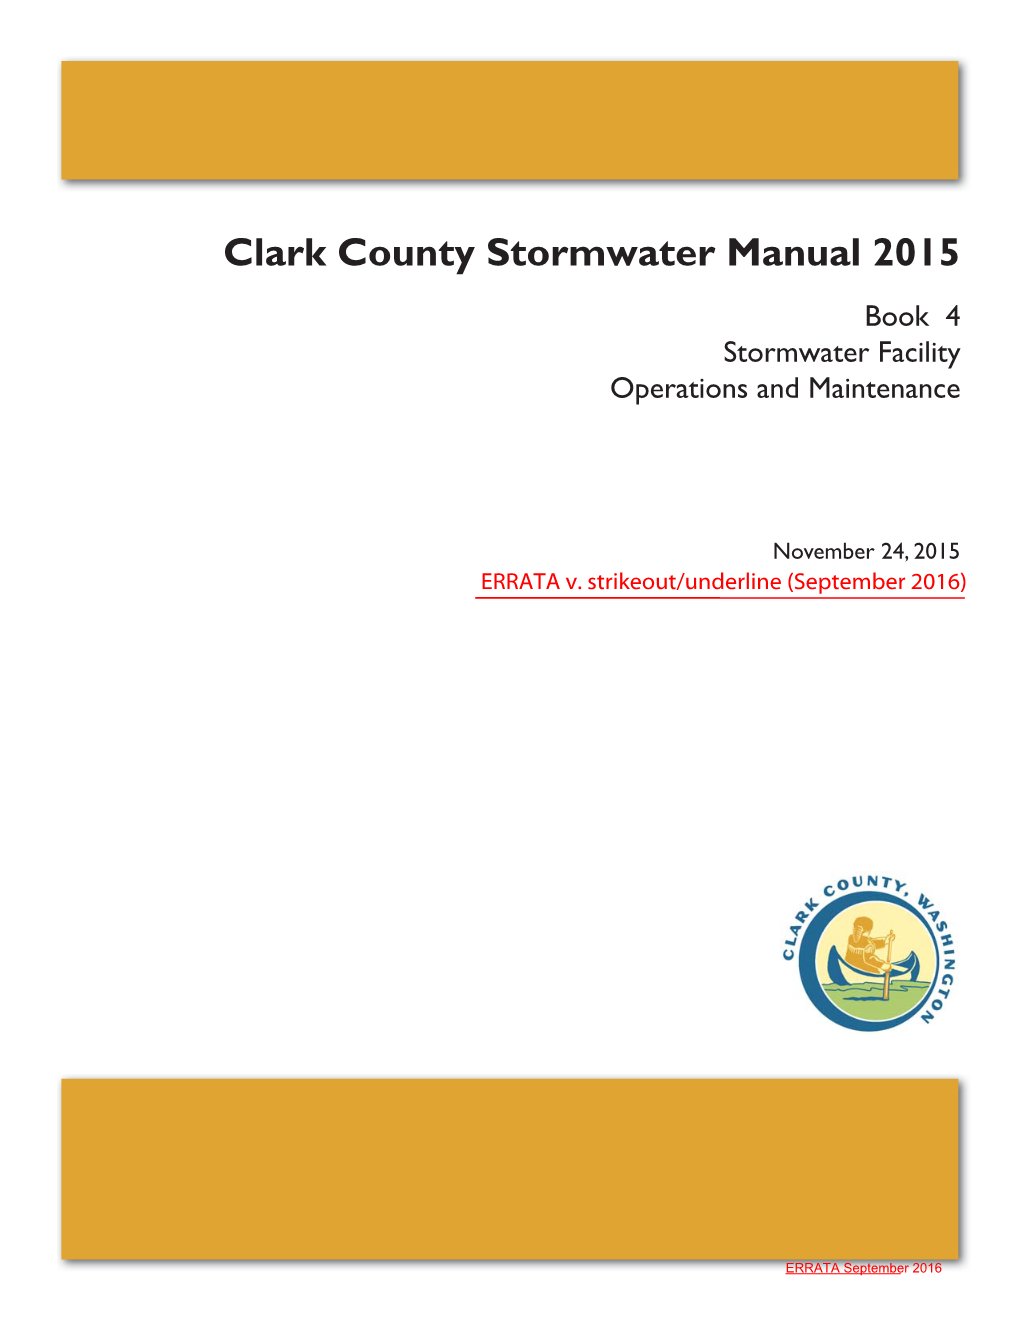 Clark County Stormwater Manual 2015 Book 4 Stormwater Facility Operations and Maintenance